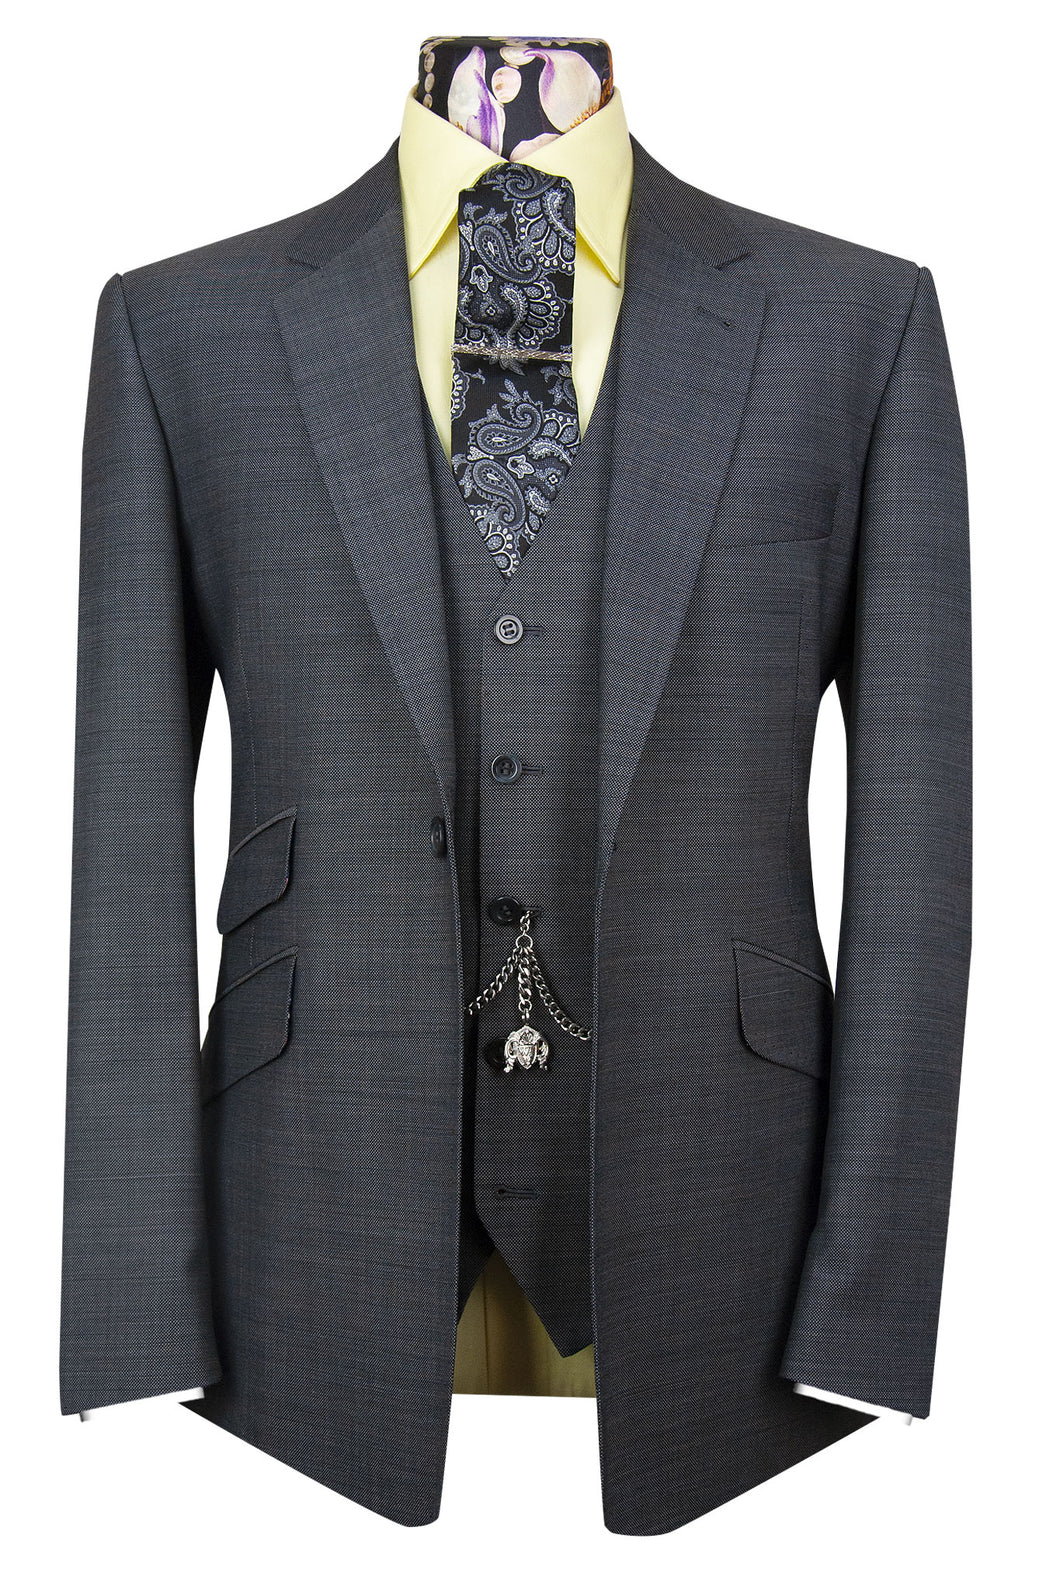 The Quince Graphite Grey Suit with White Weave Pattern